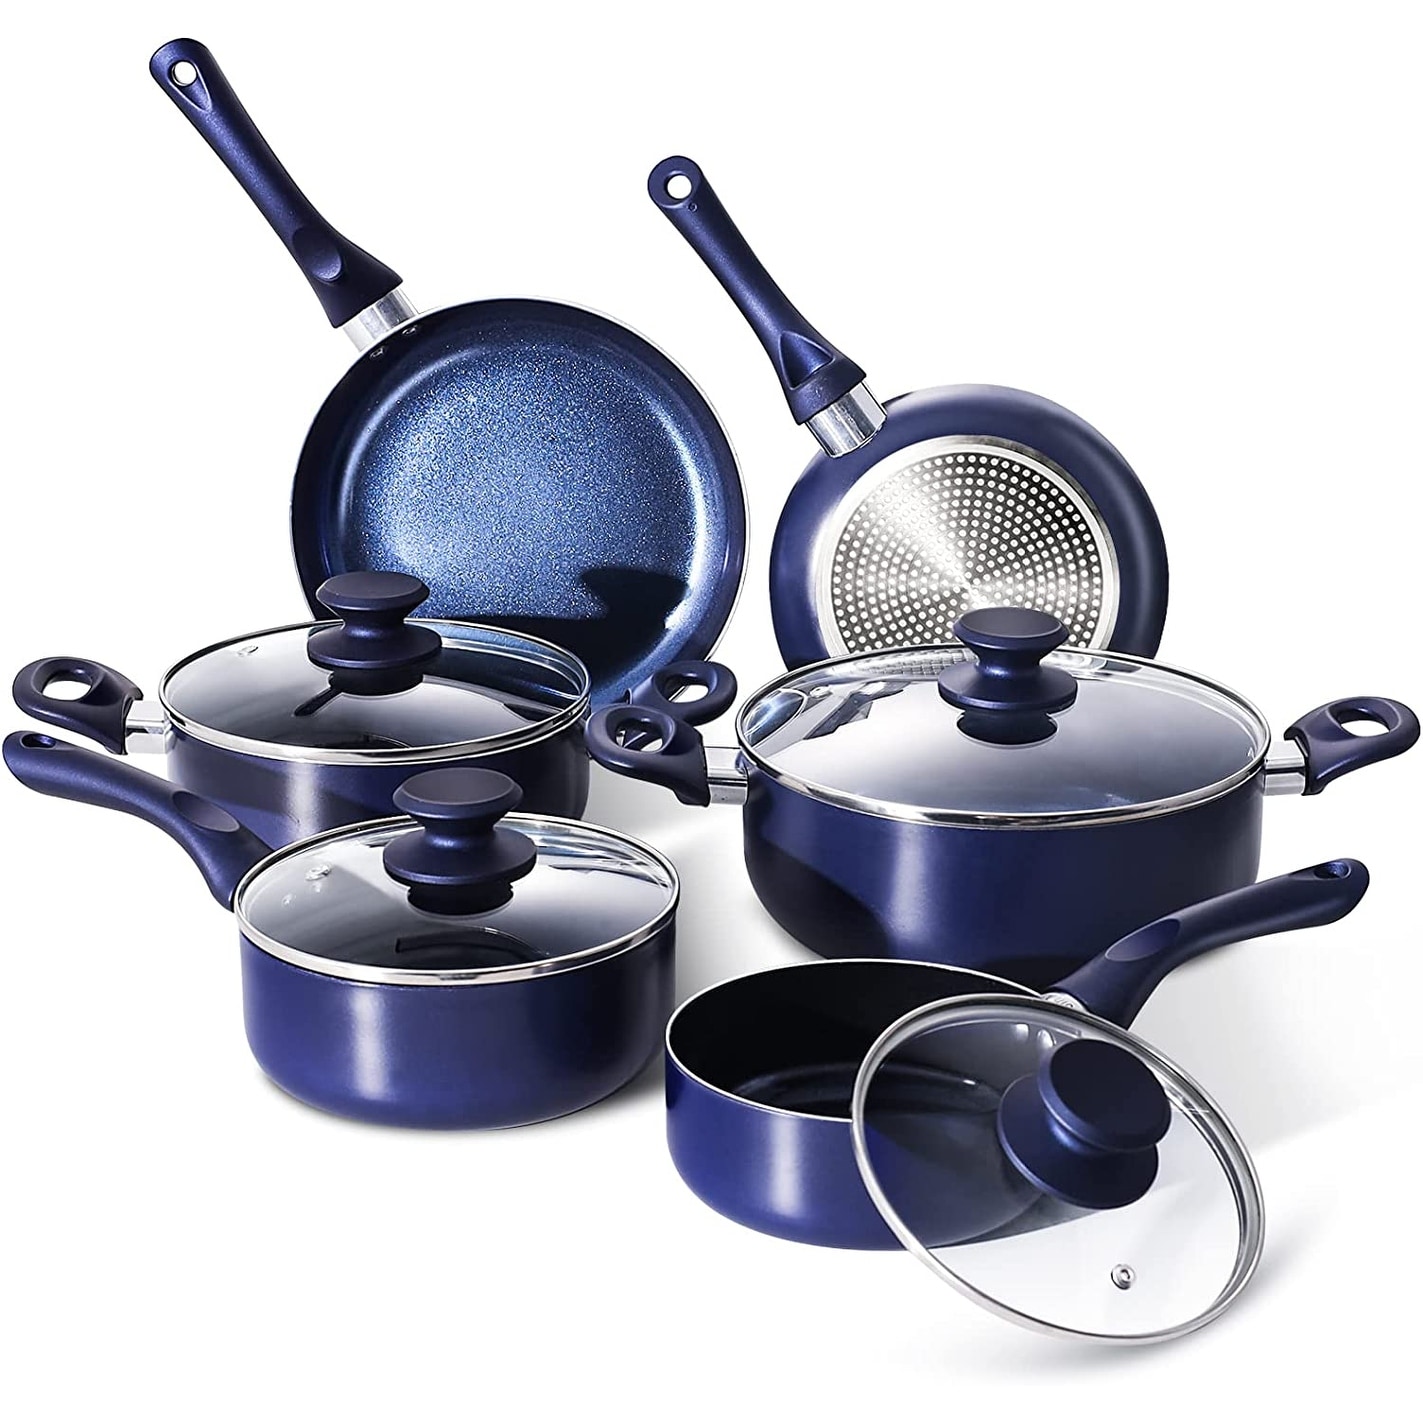 https://ak1.ostkcdn.com/images/products/is/images/direct/8d7dfb036600a5eba65622ed74d0b01174604cfa/6-piece-Non-stick-Cookware-Set-Pots-and-Pans-Set-for-Cooking---Ceramic-Coating-Saucepan%2C-Stock-Pot-with-Lid%2C-Frying-Pan%2C-Copper.jpg